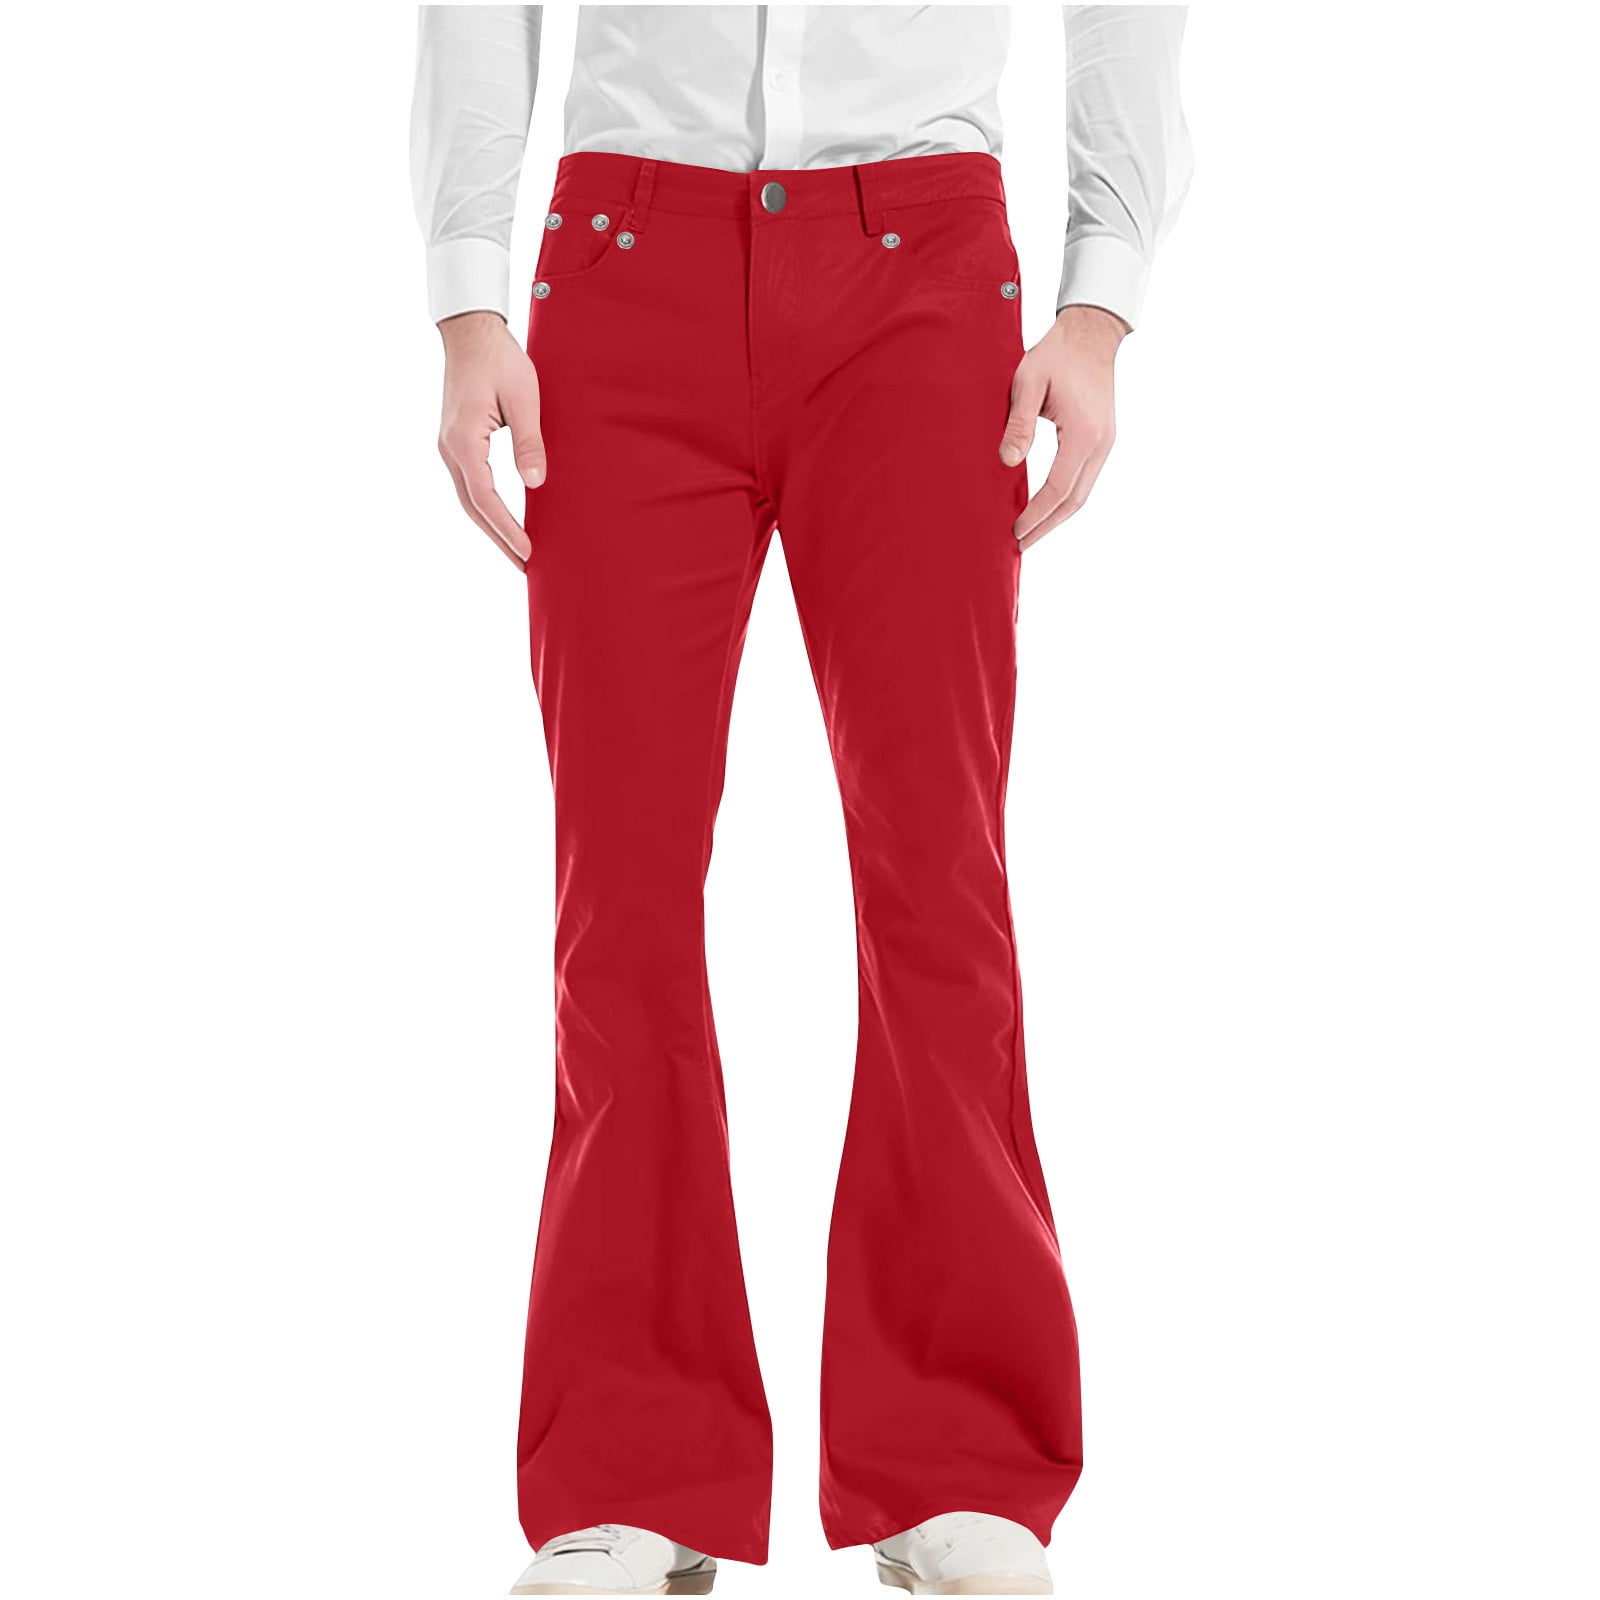 AherBiu Mens Vintage Flare Pants High Waisted Solid Color Retro